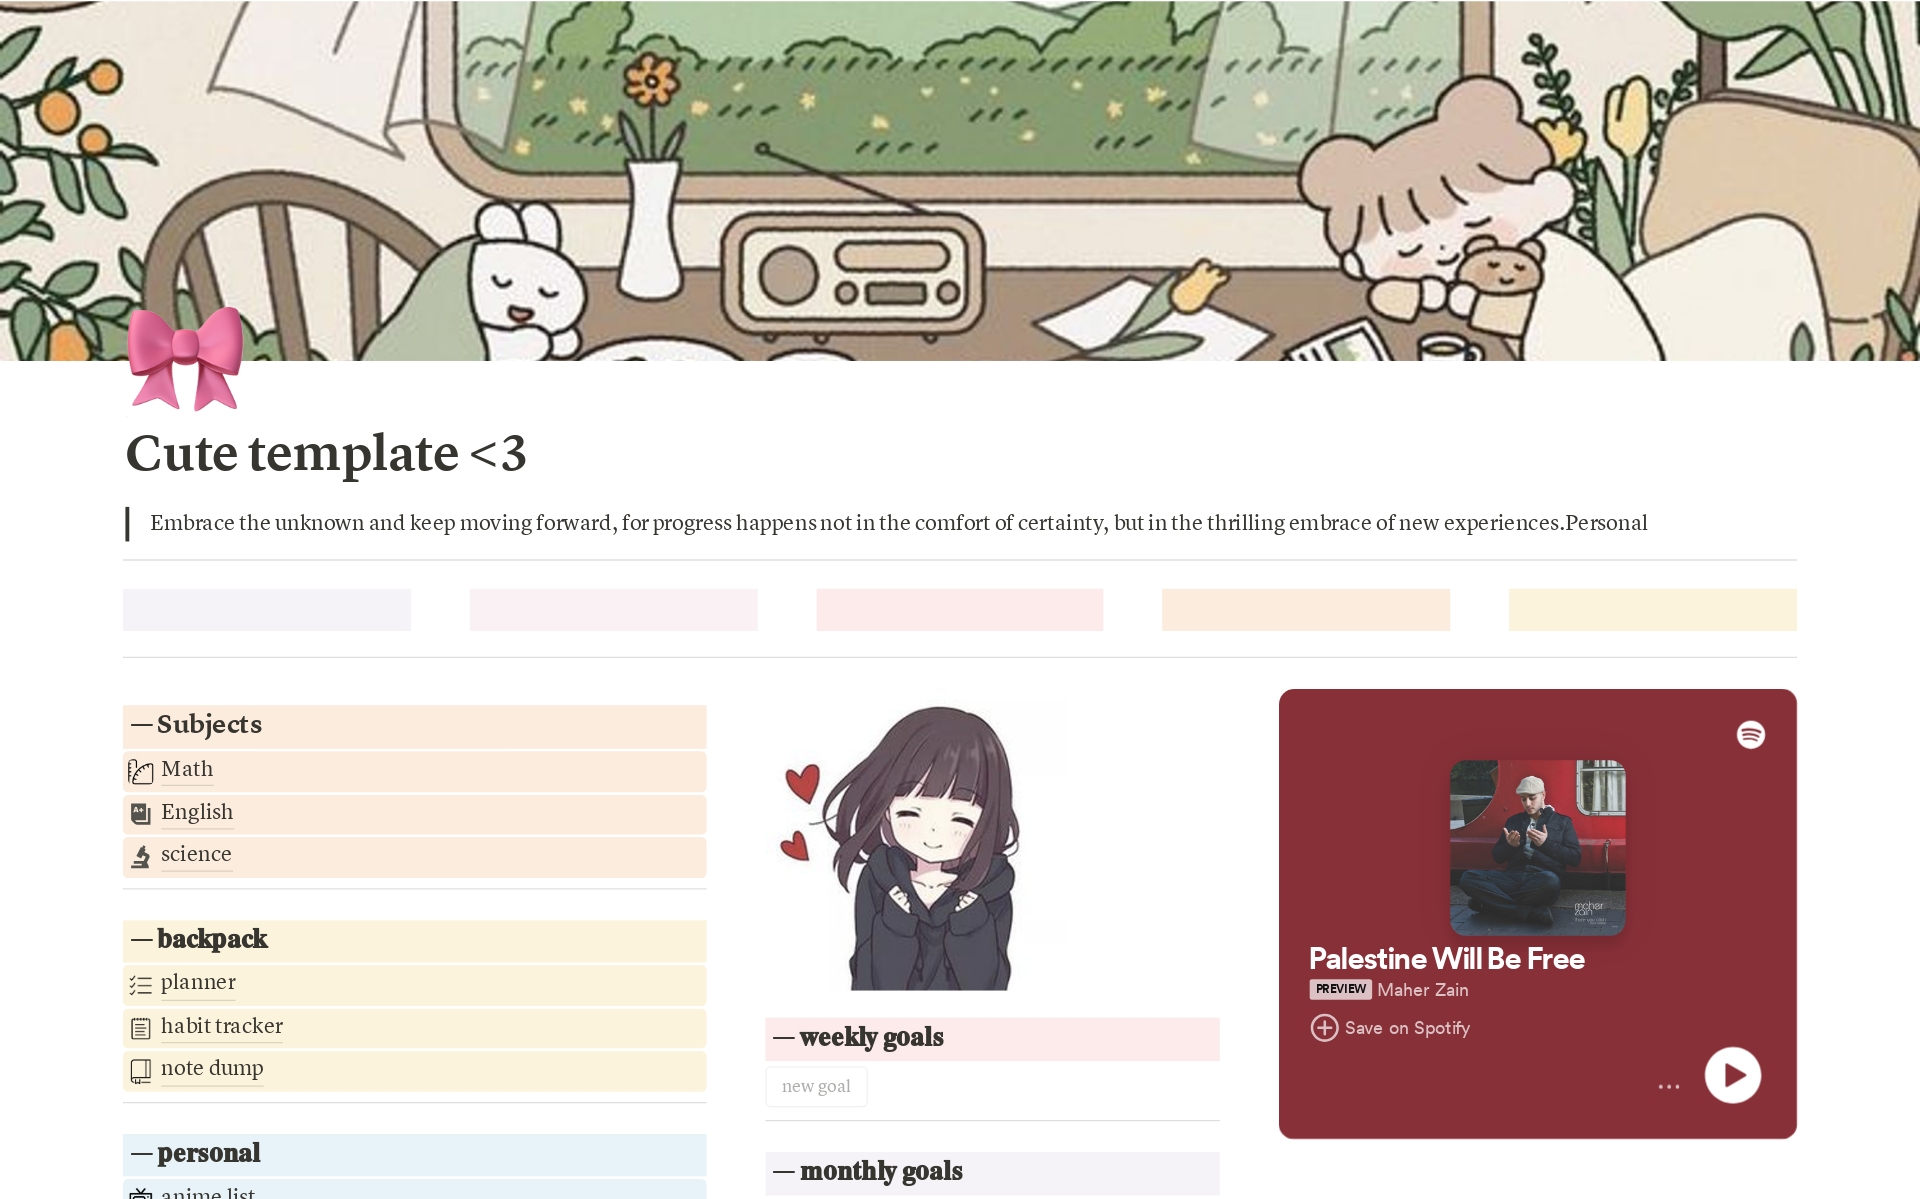 A template preview for Cute template <3